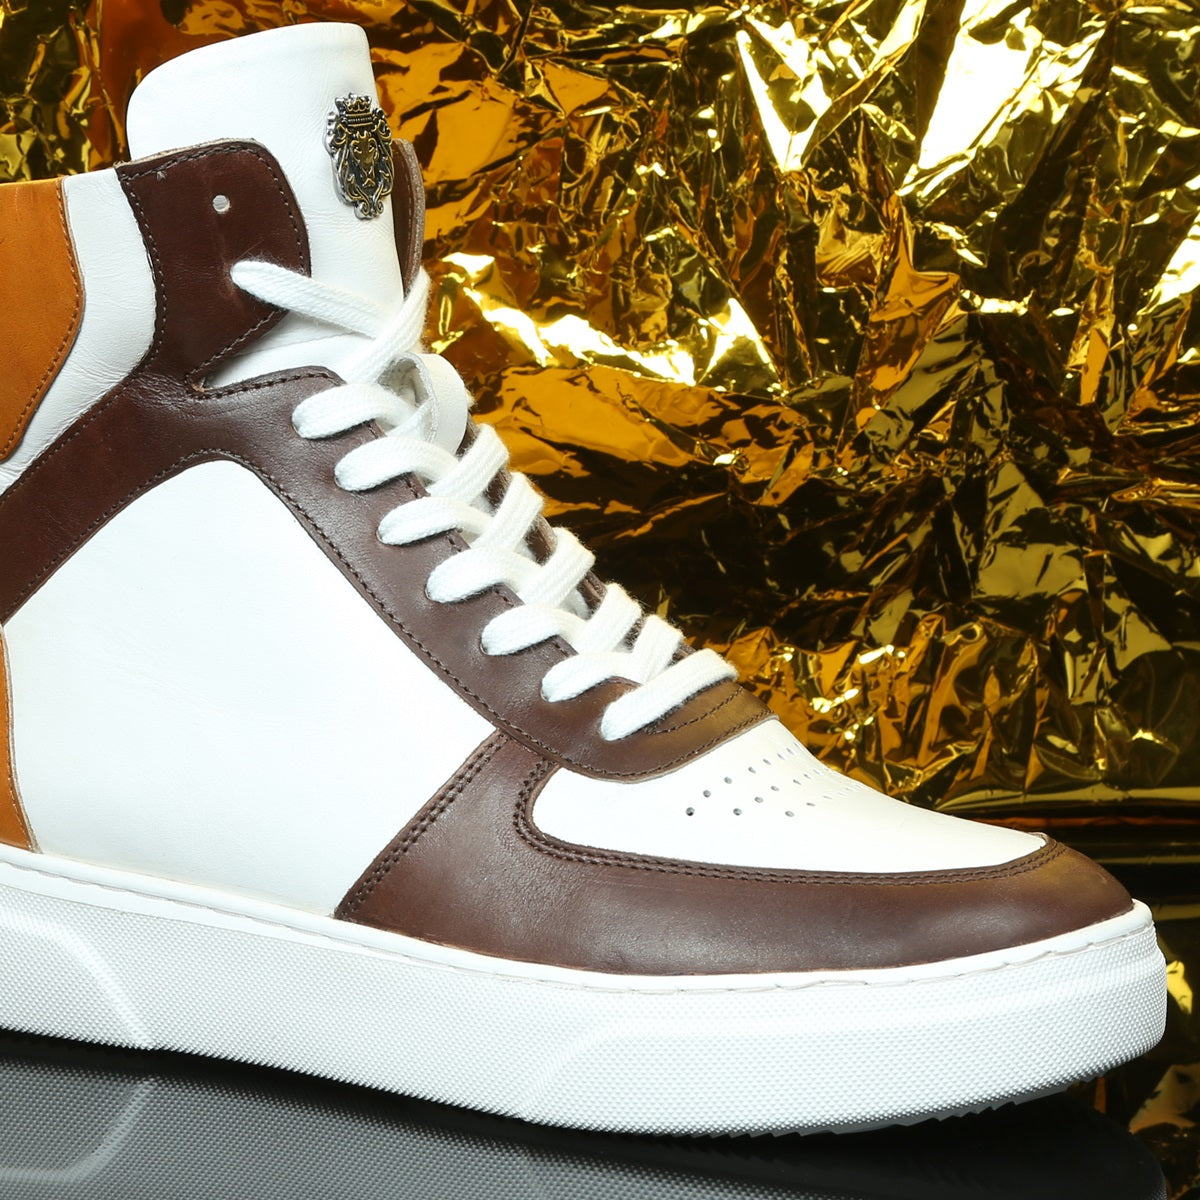 Contrasting Brown & Tan Leather Sneakers White High Ankle by Brune & Bareskin 40/6